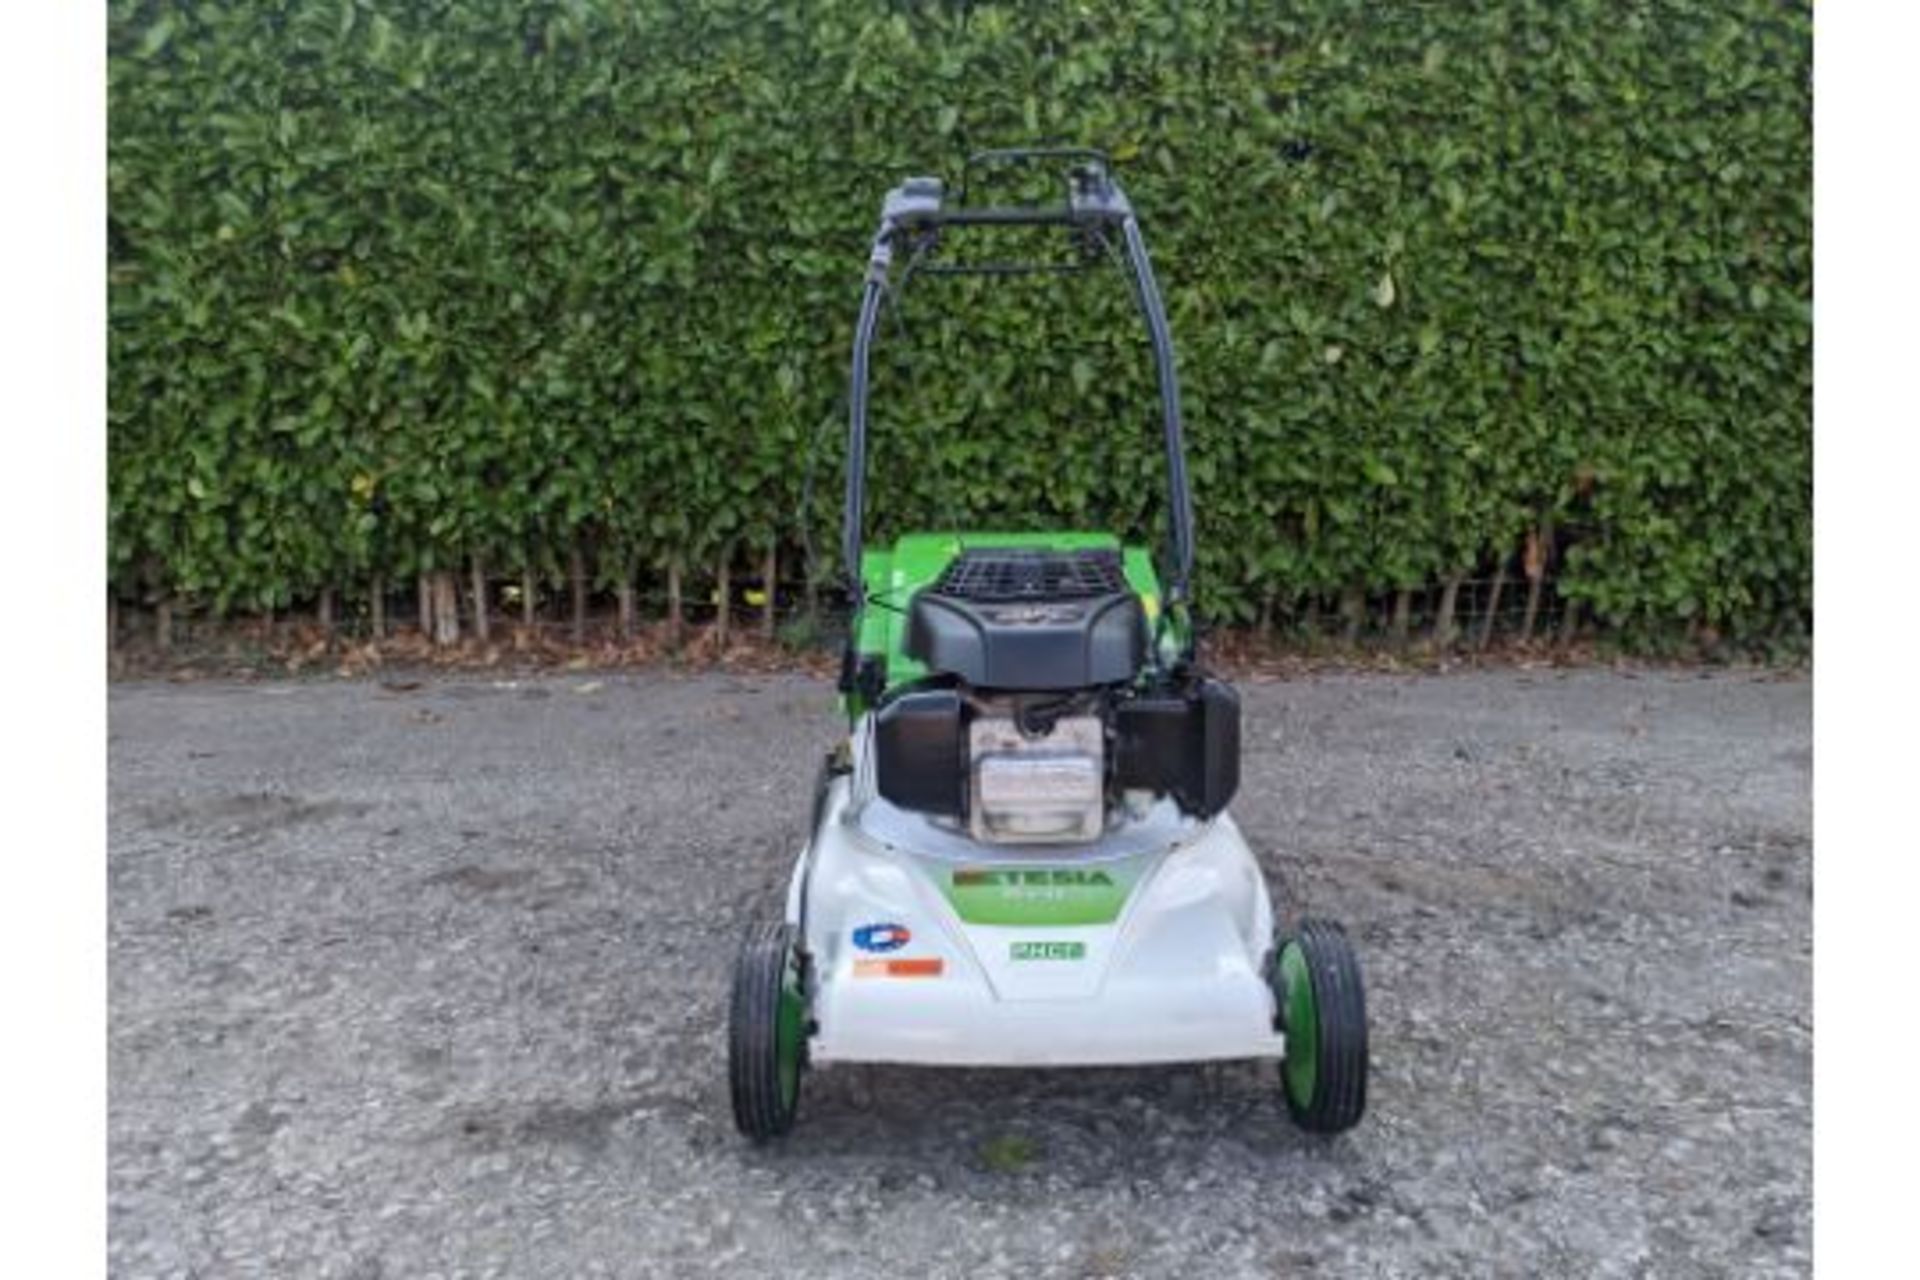 2019 Etesia Pro 46 PHCT 18" Self Propelled Lawn Mower - Image 5 of 5